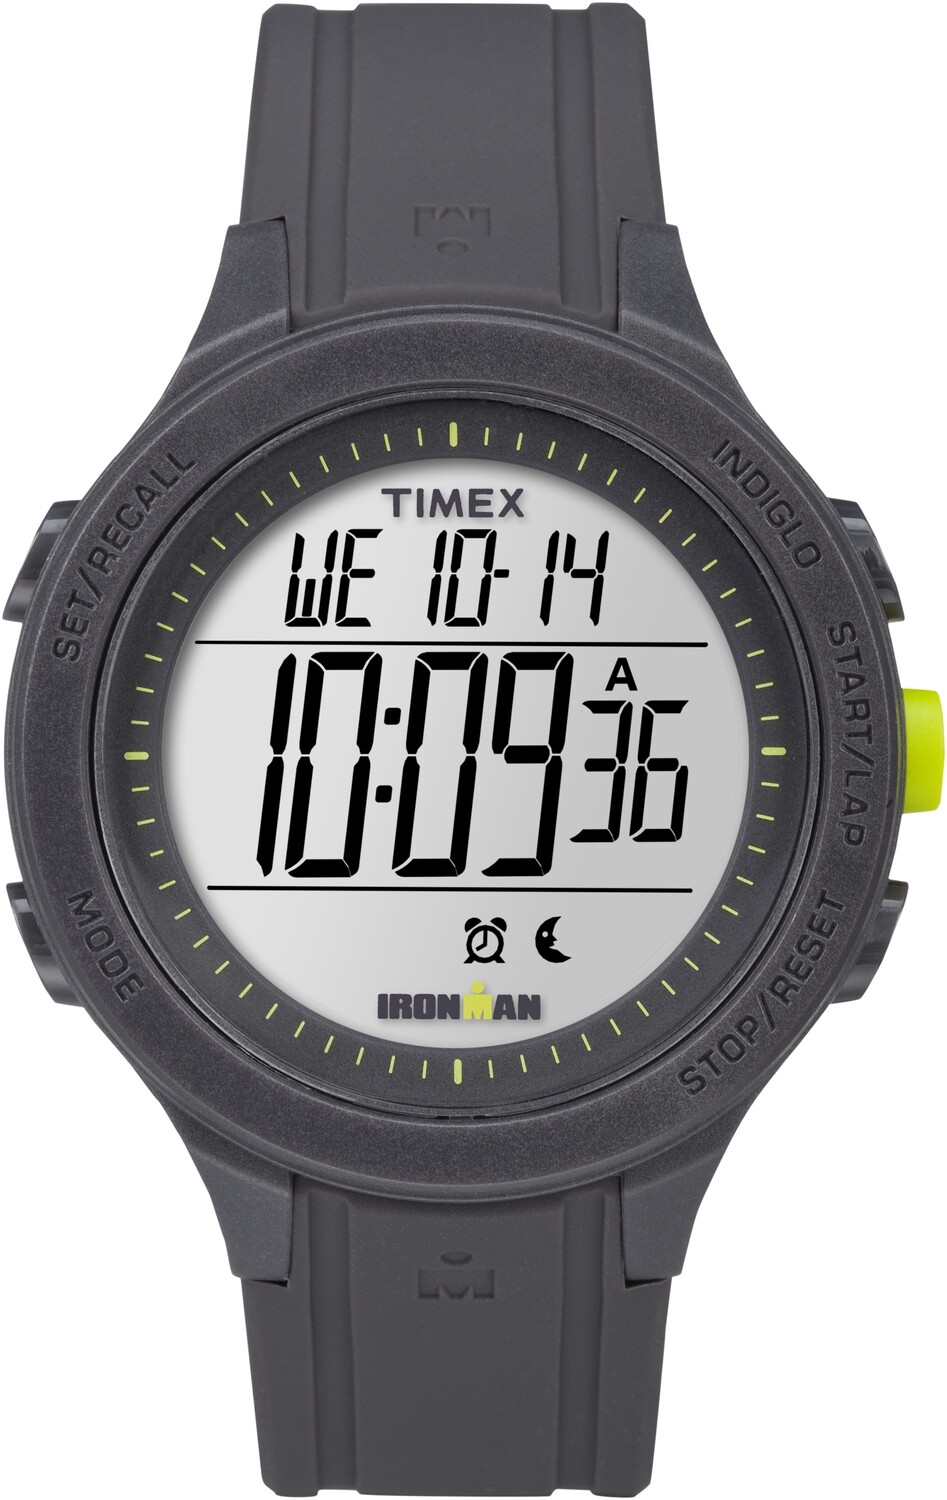 Timex Men's TW5M14500 Ironman Essential 30 Black/Lime Silicone Strap Watch